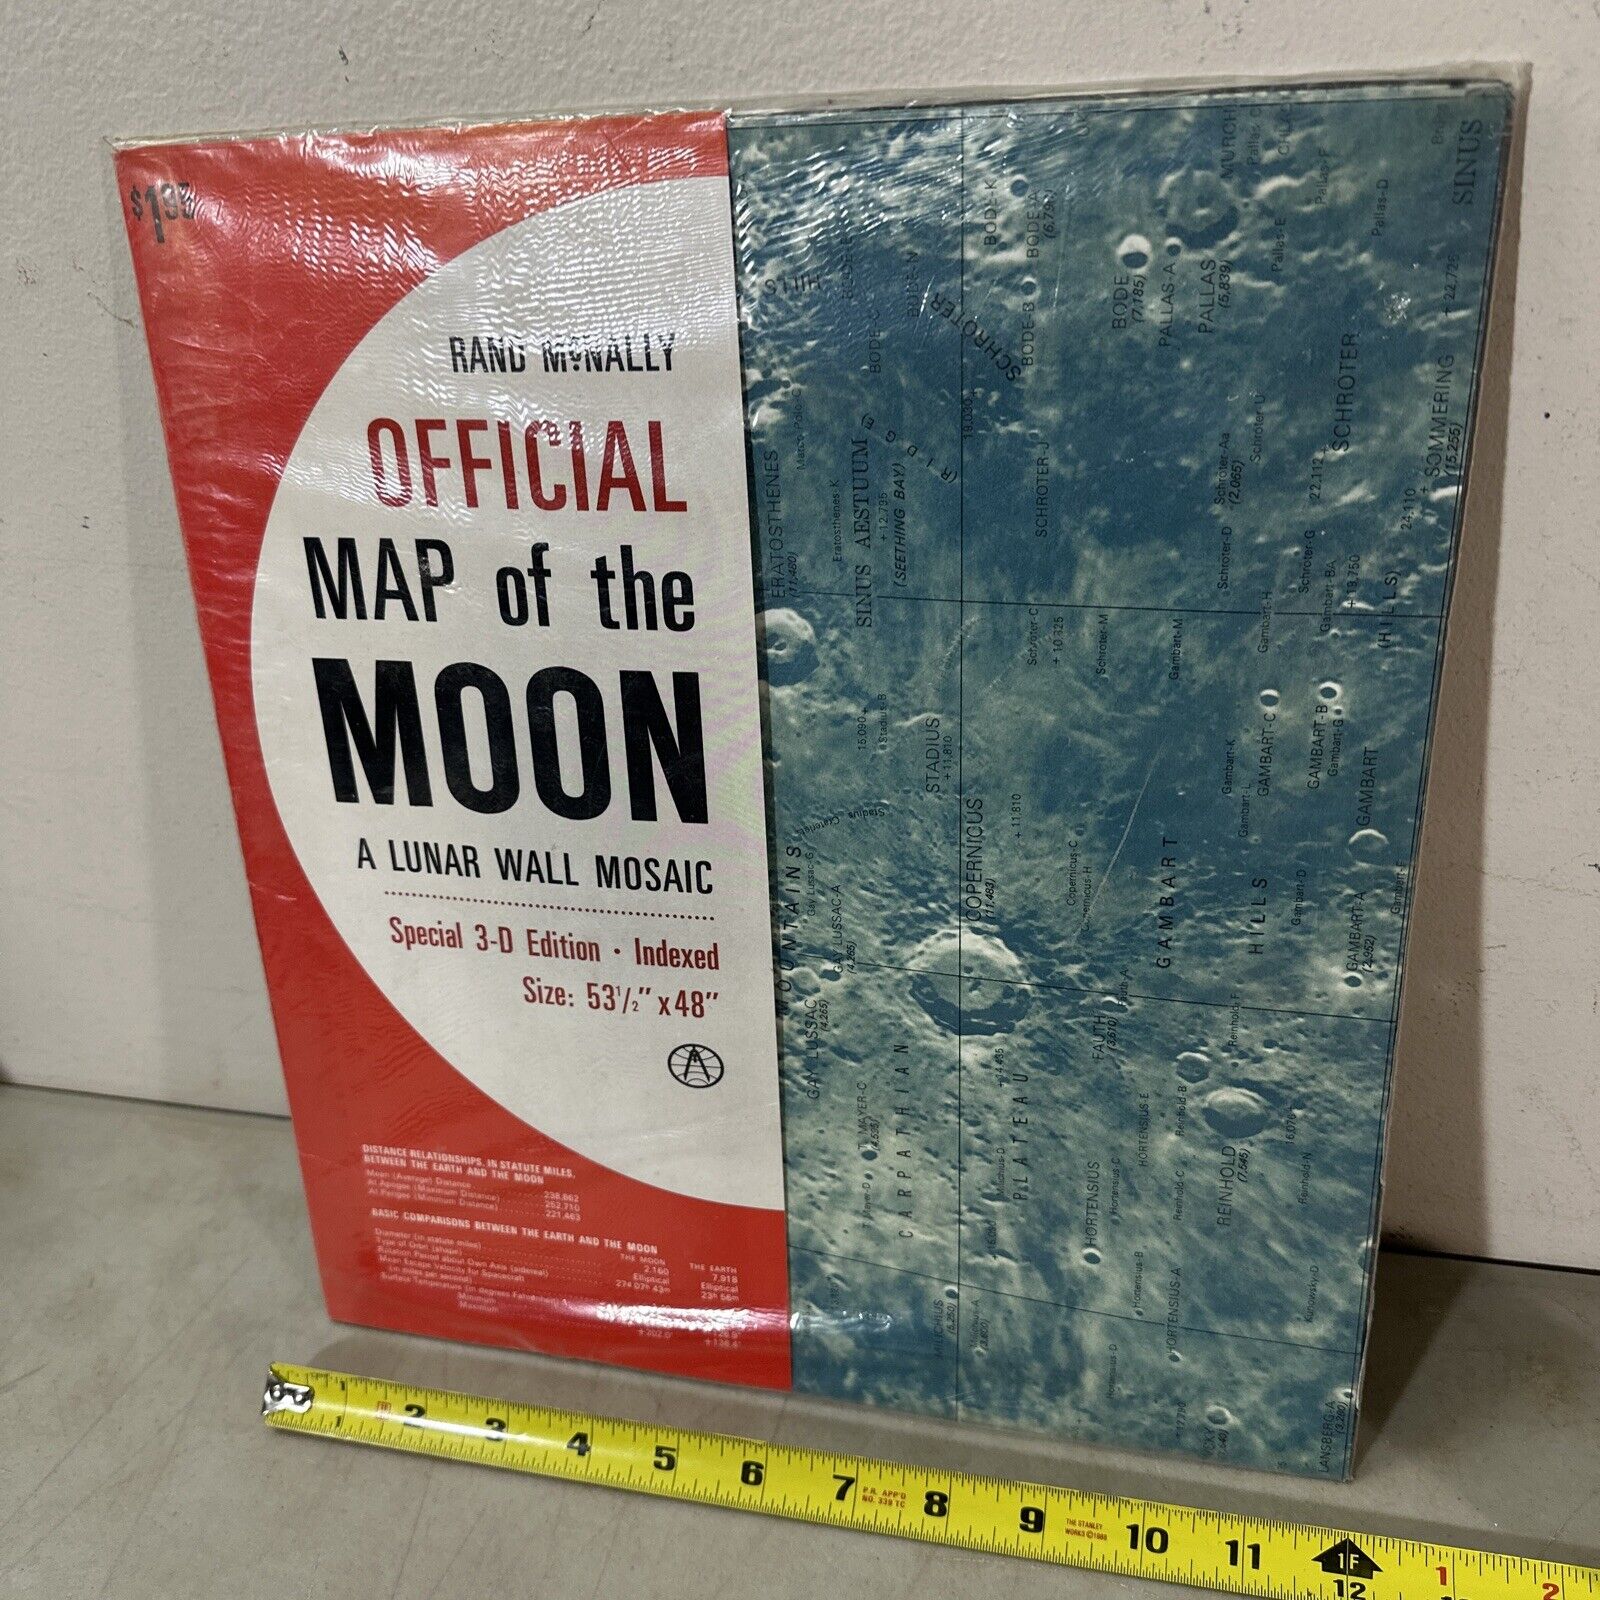 Vintage Sealed Rand McNally Official Map of the Moon 53x48 Lunar Wall Mosaic 3-D